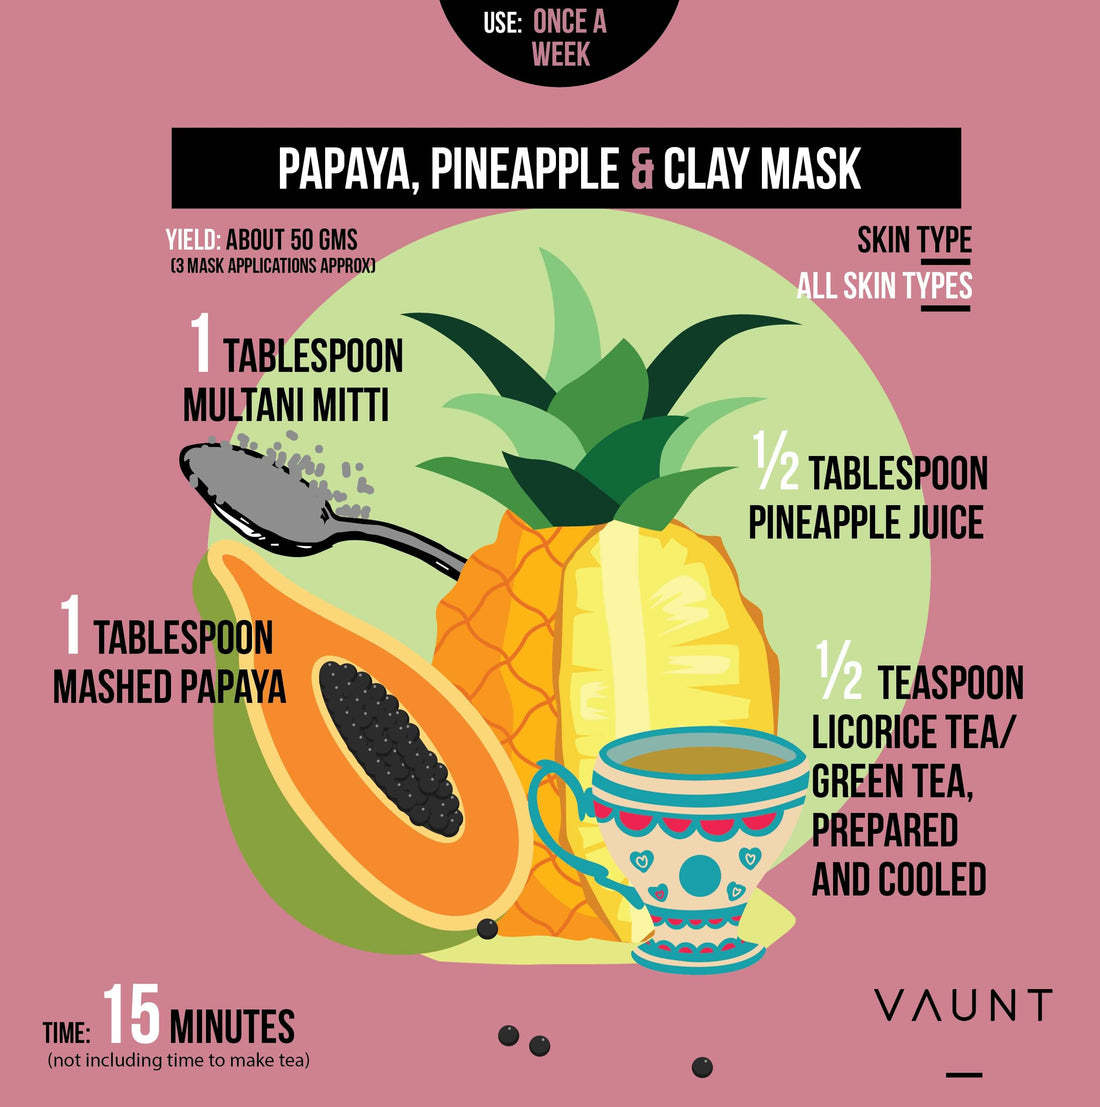 Deep Cleanse With This Easy Tropical Clay Mask